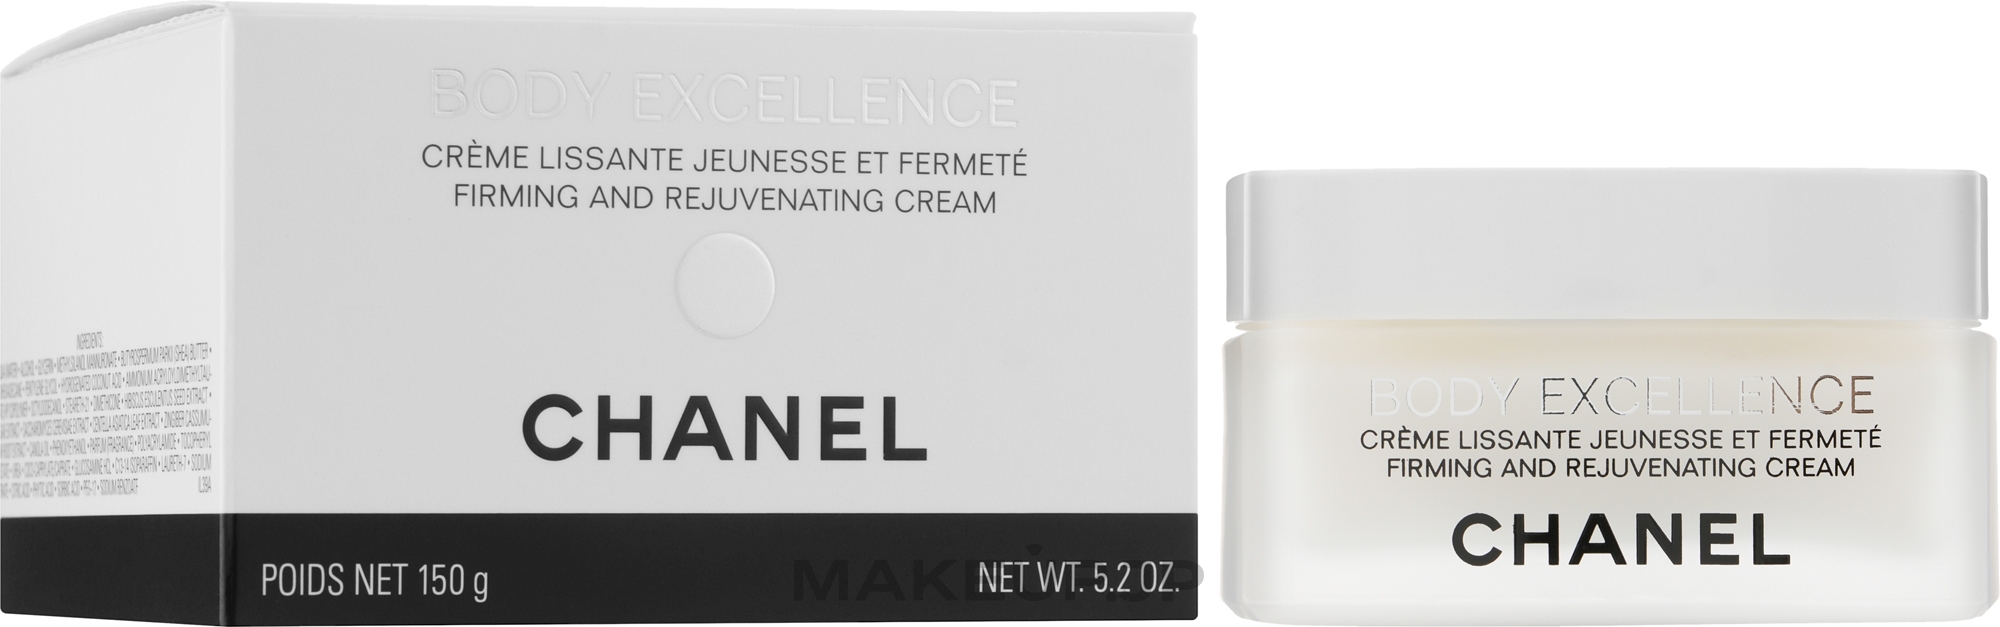 Smoothing and Firming Body Cream - Chanel Body Excellence Body Firming Cream — photo 150 g